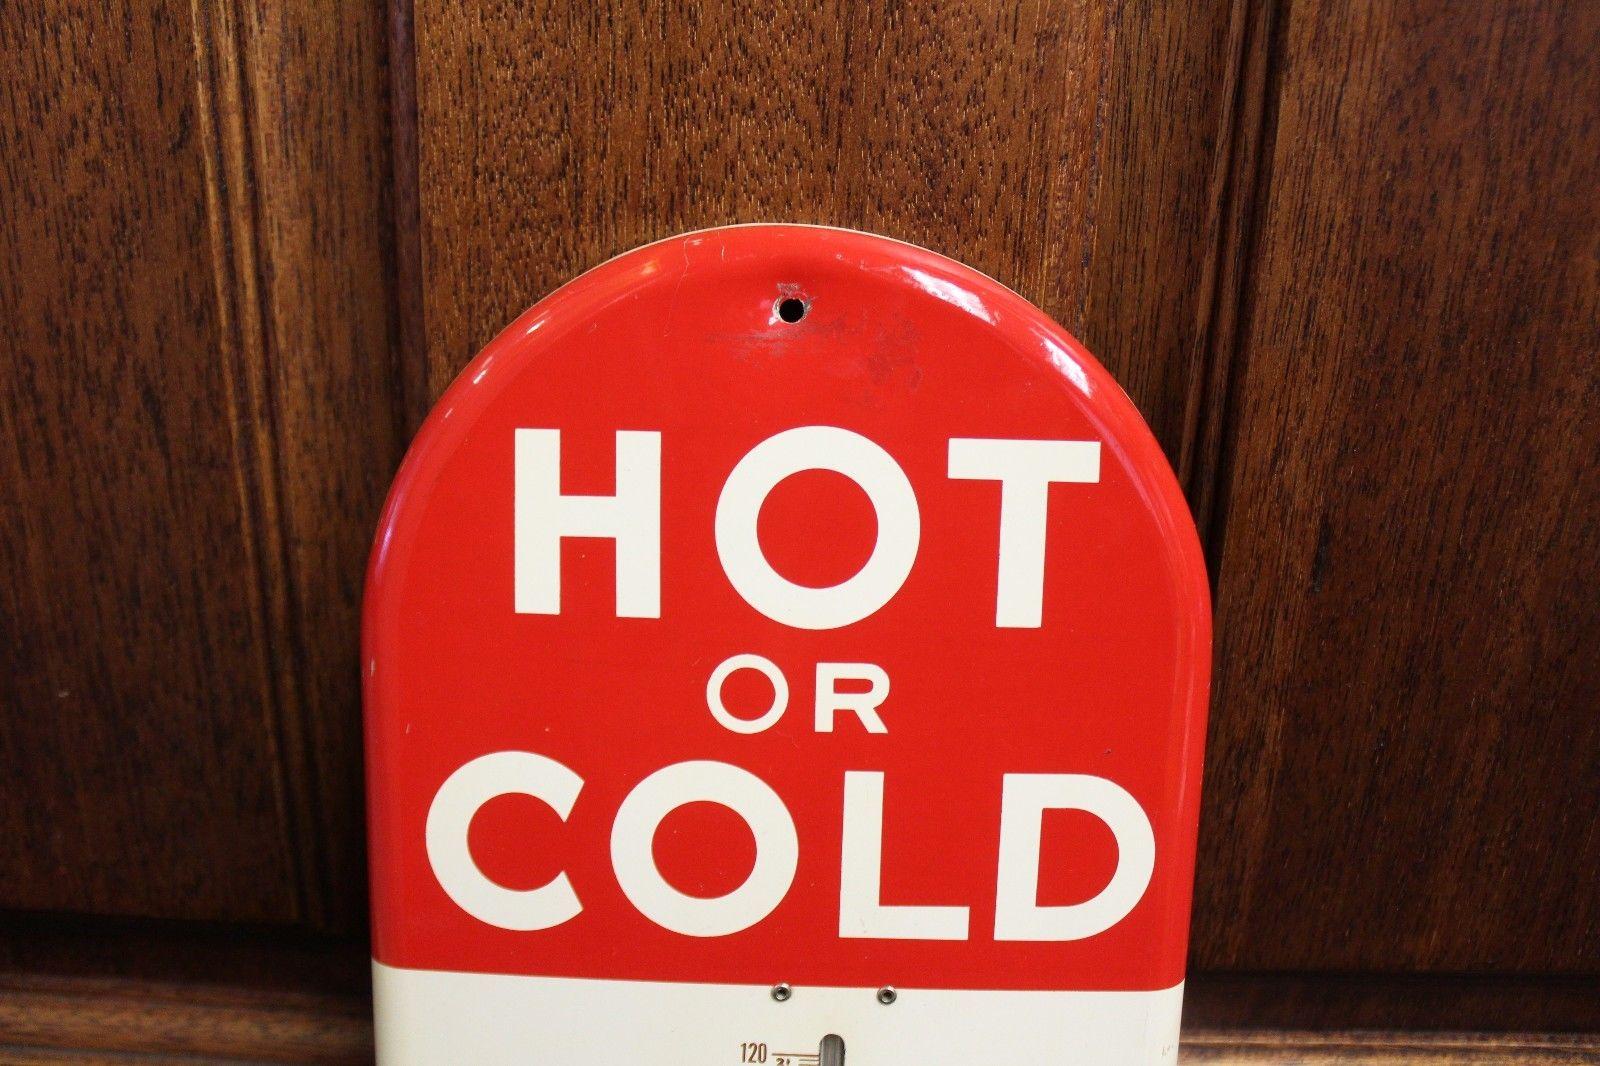 Soda companies were promoted through diverse methods of advertising—from porcelain signs and tin drink trays to wall clocks and even toy trains. Thermometers were just one item in this larger strategy of “practical” advertising that included